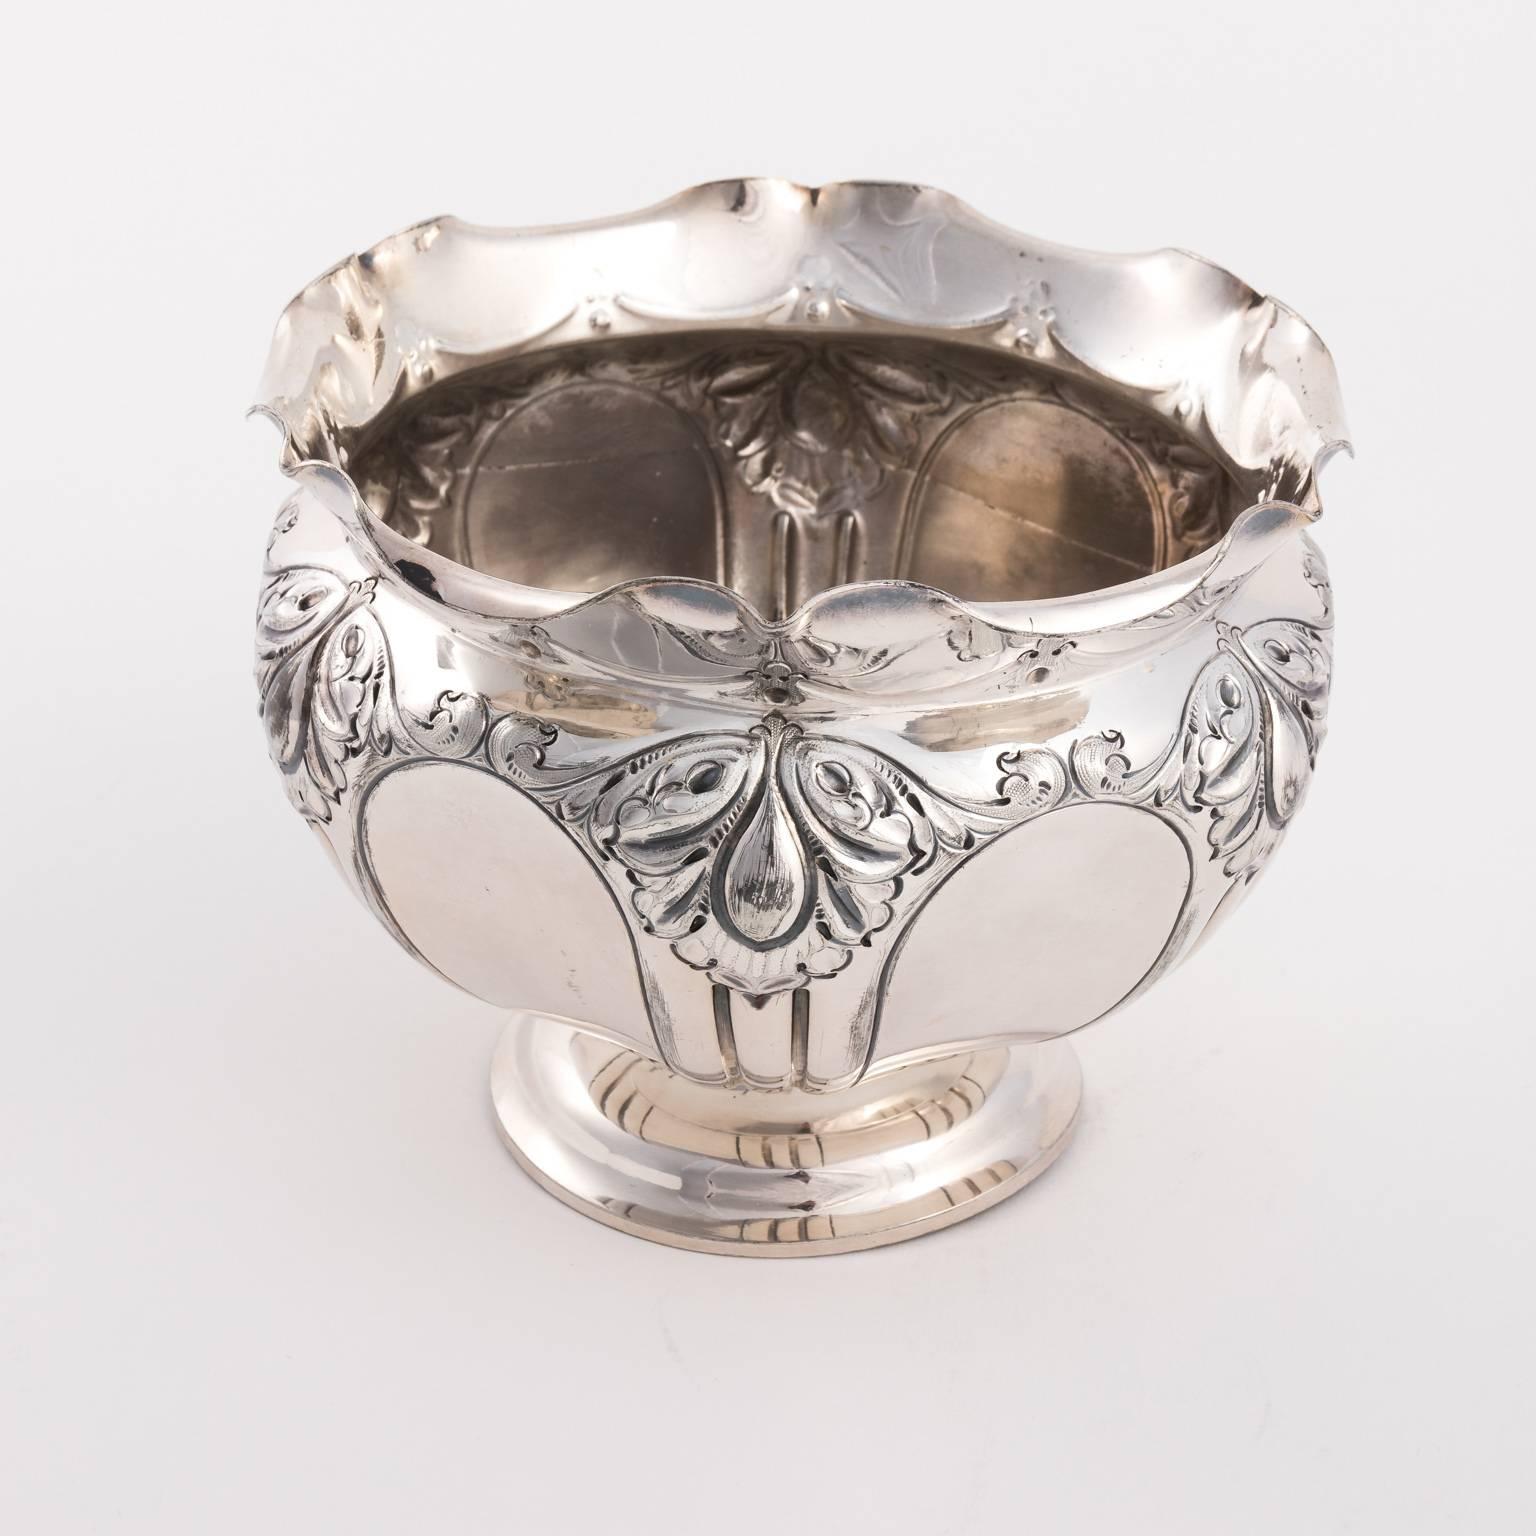 Edwardian silver plated cache pot with ruffled edges and embossed foliage, circa 1900.
 